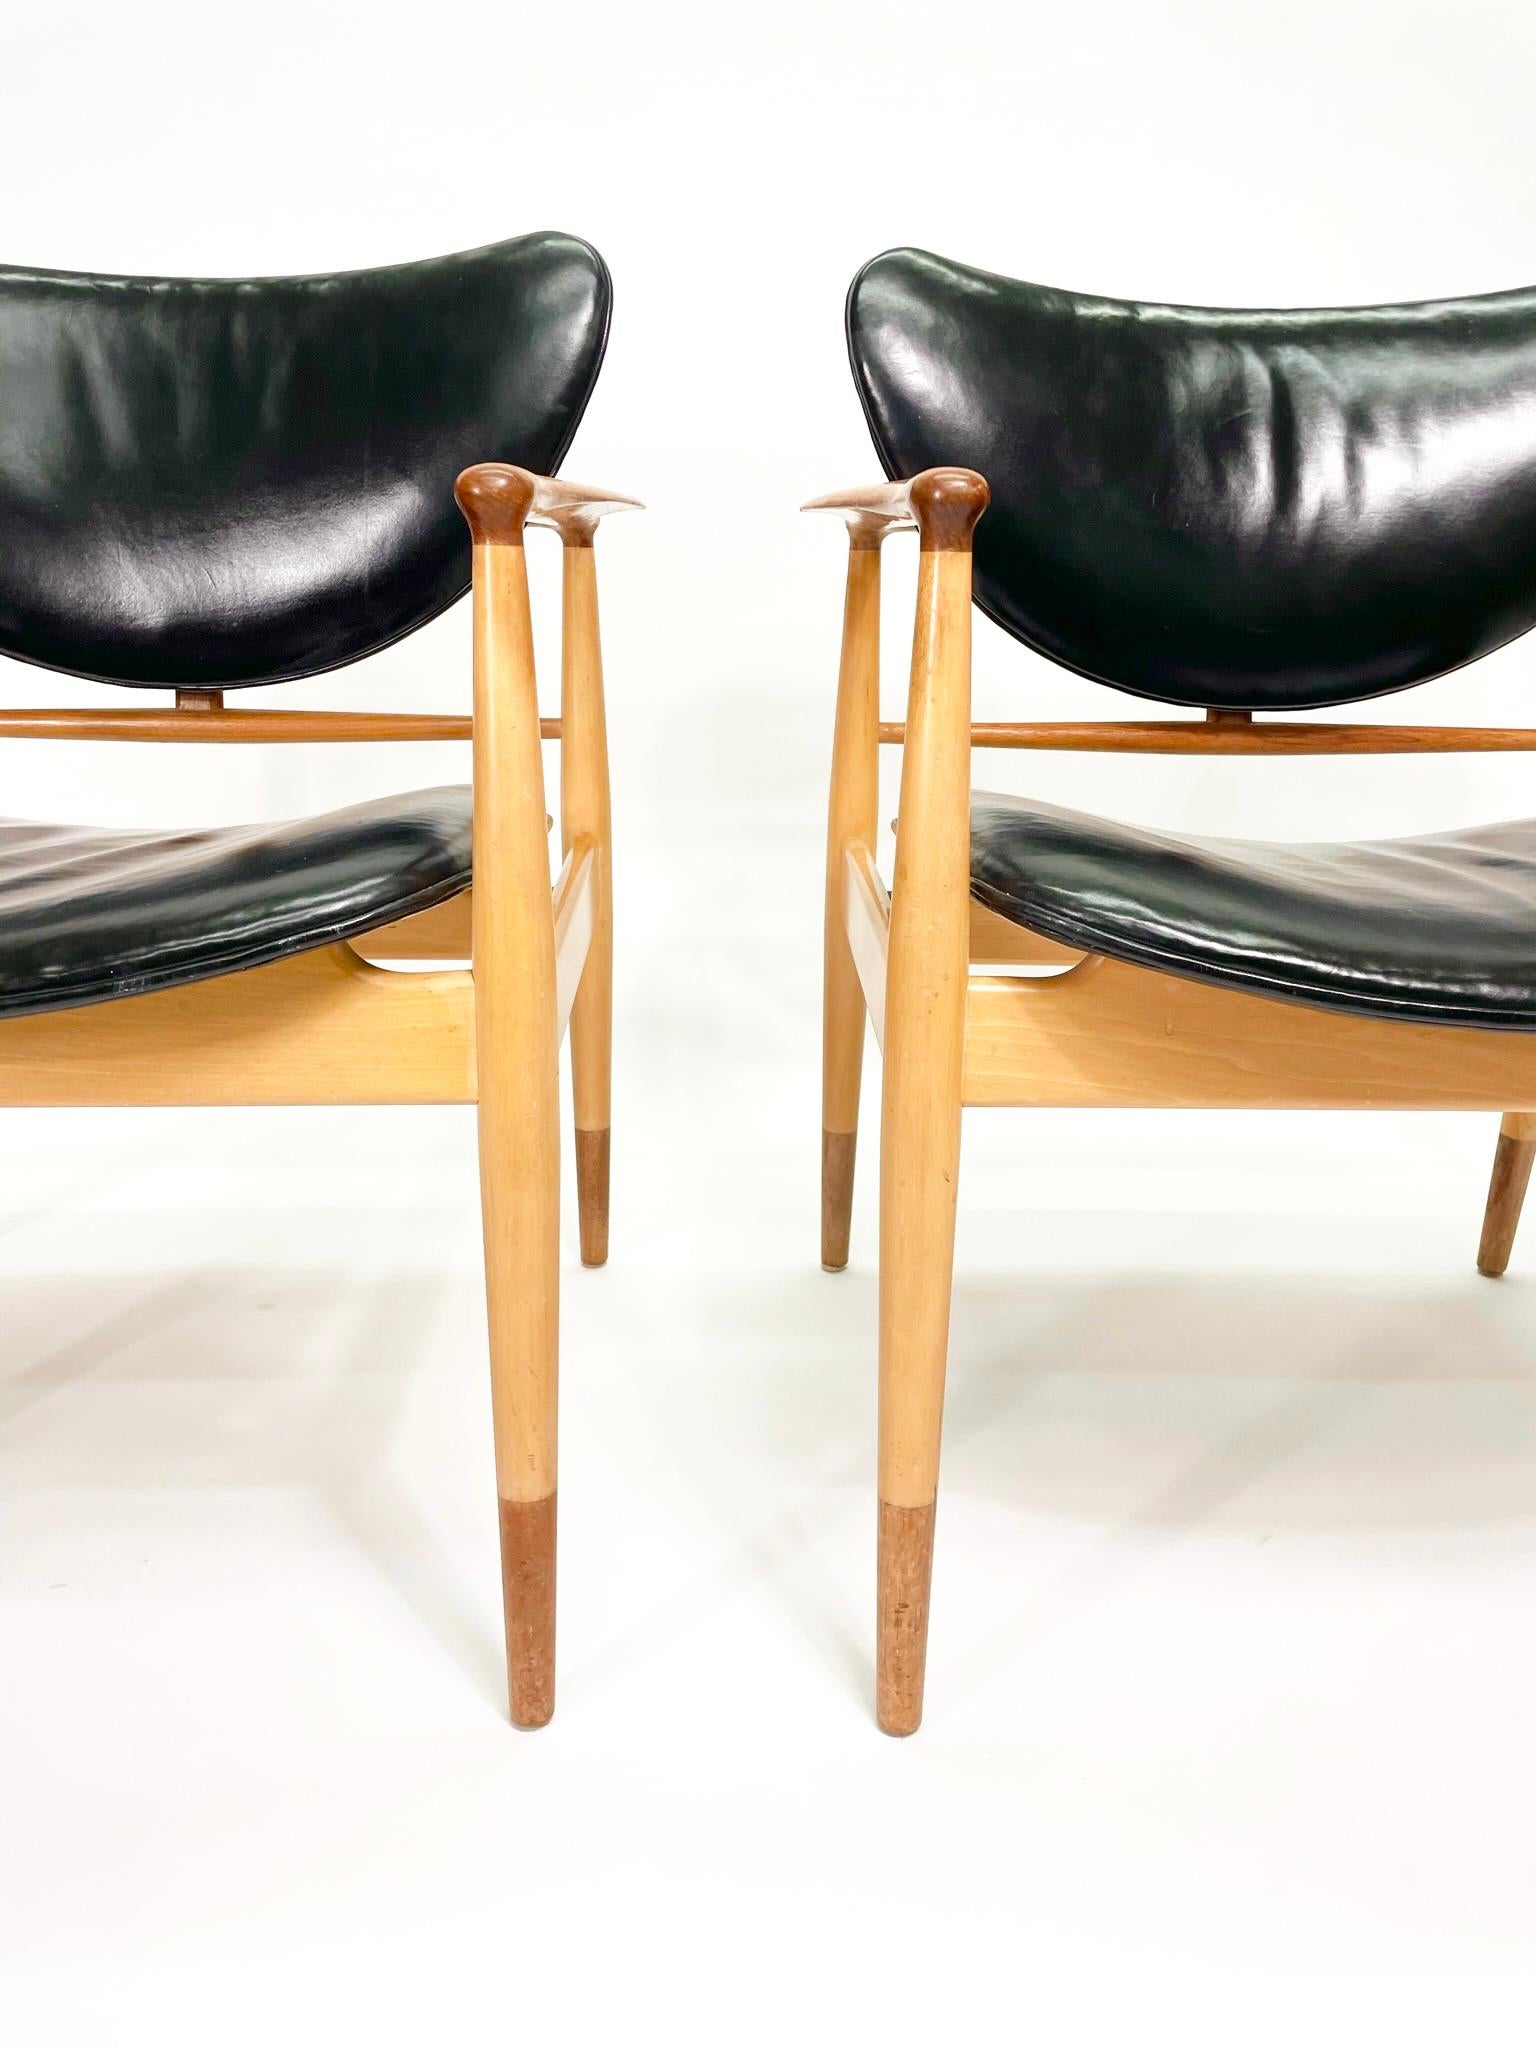 American Finn Juhl Model 48 Chair by Baker, in Teak and Maple (2 available) For Sale